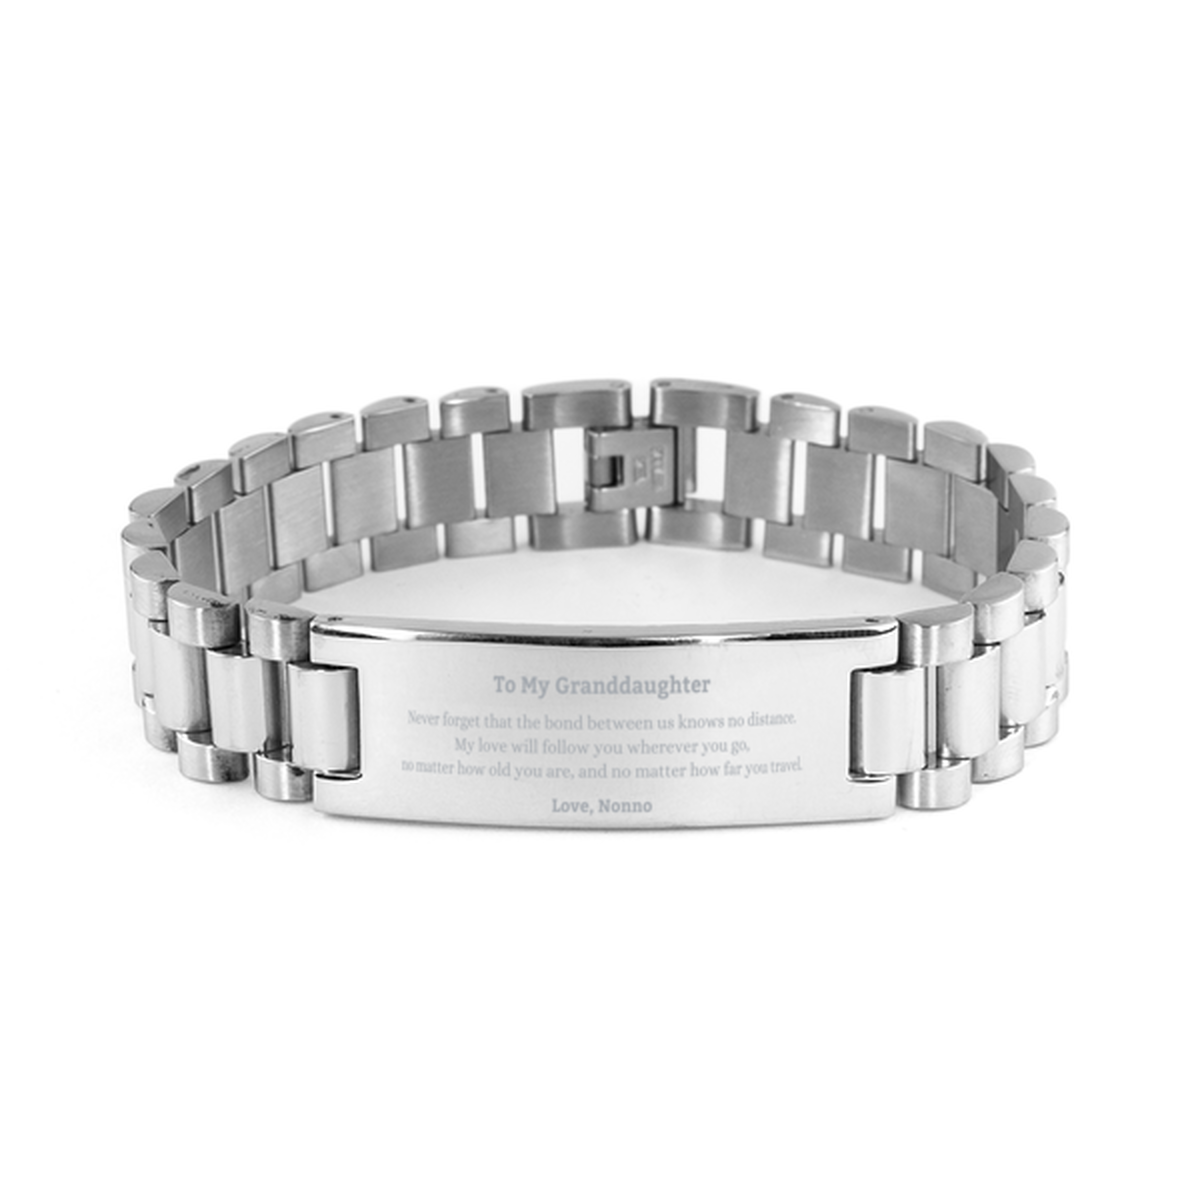 Granddaughter Birthday Gifts from Nonno, Adjustable Ladder Stainless Steel Bracelet for Granddaughter Christmas Graduation Unique Gifts Granddaughter Never forget that the bond between us knows no distance. Love, Nonno